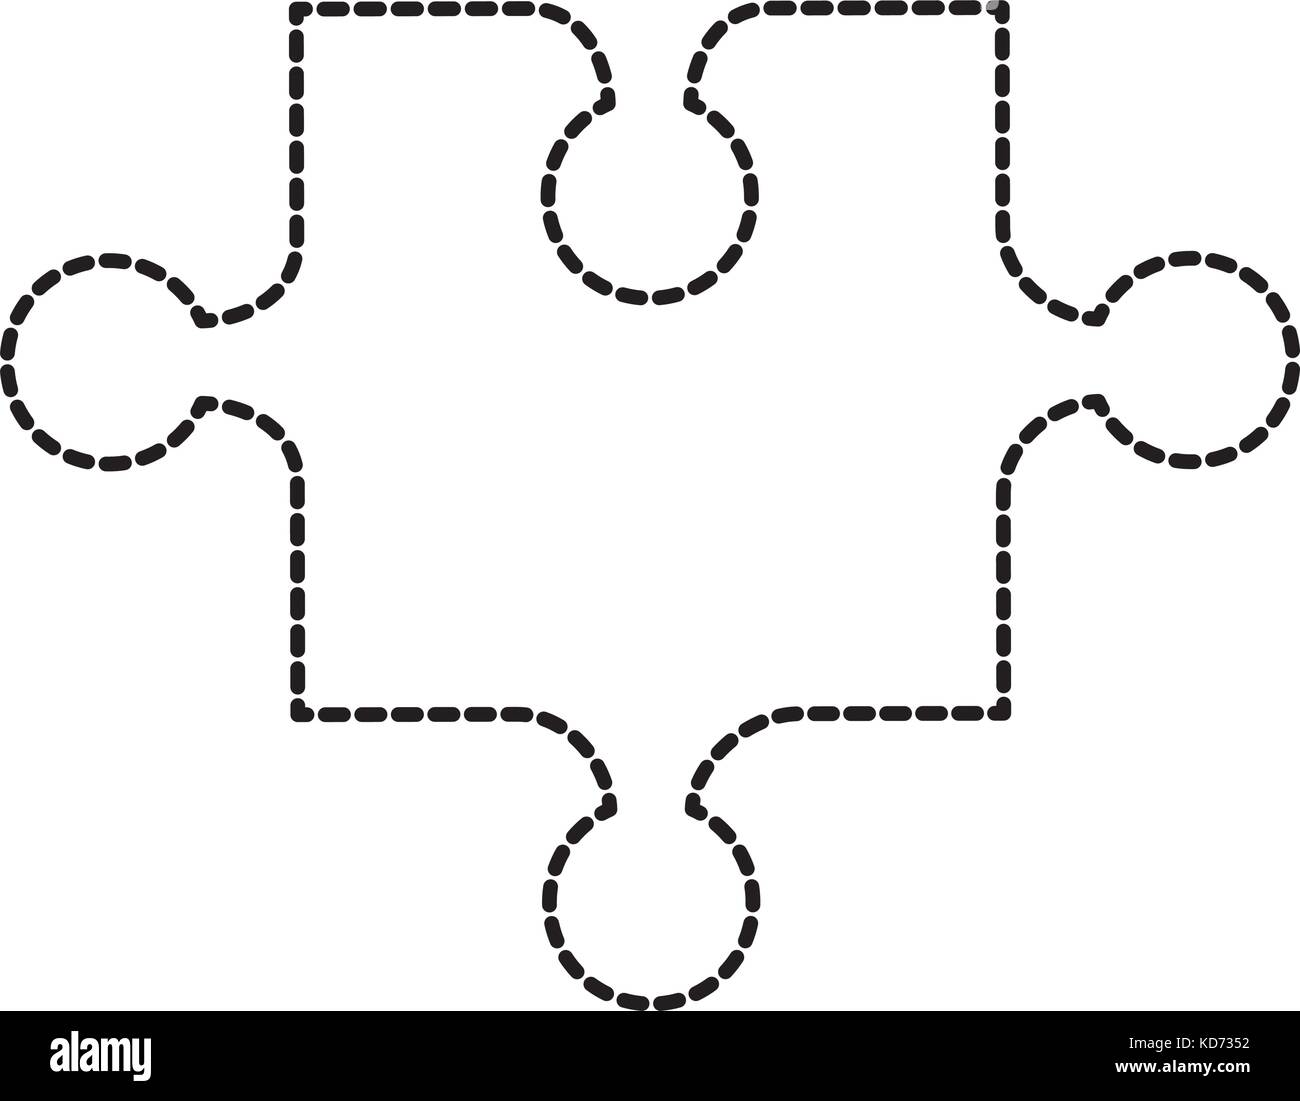 toy one piece puzzle jigsaw strategy game Stock Vector